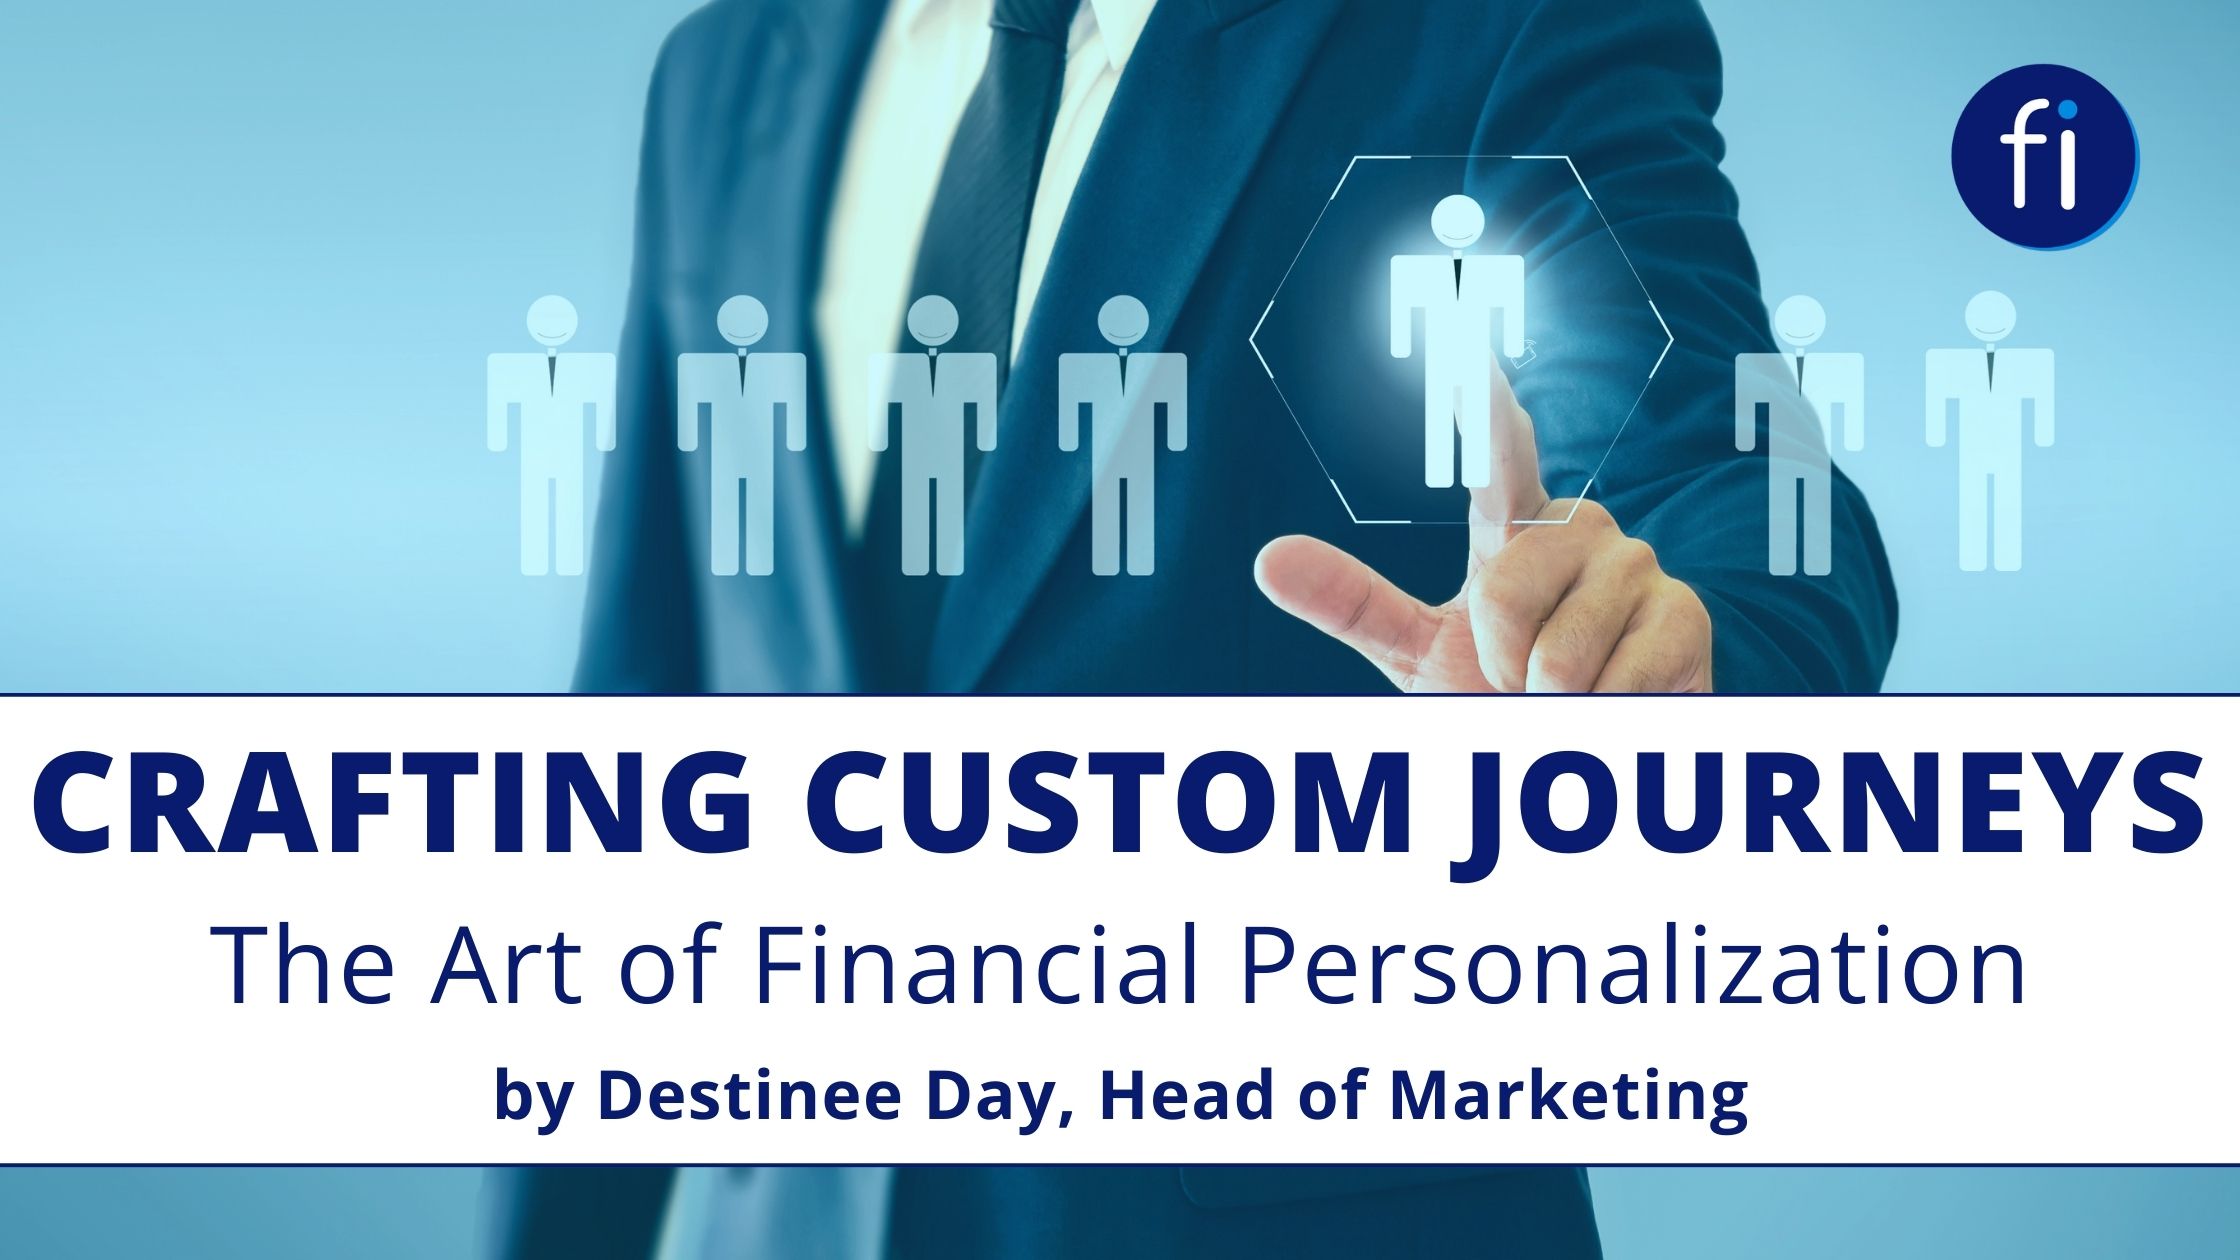 Crafting Custom Journeys: The Art of Financial Personalization